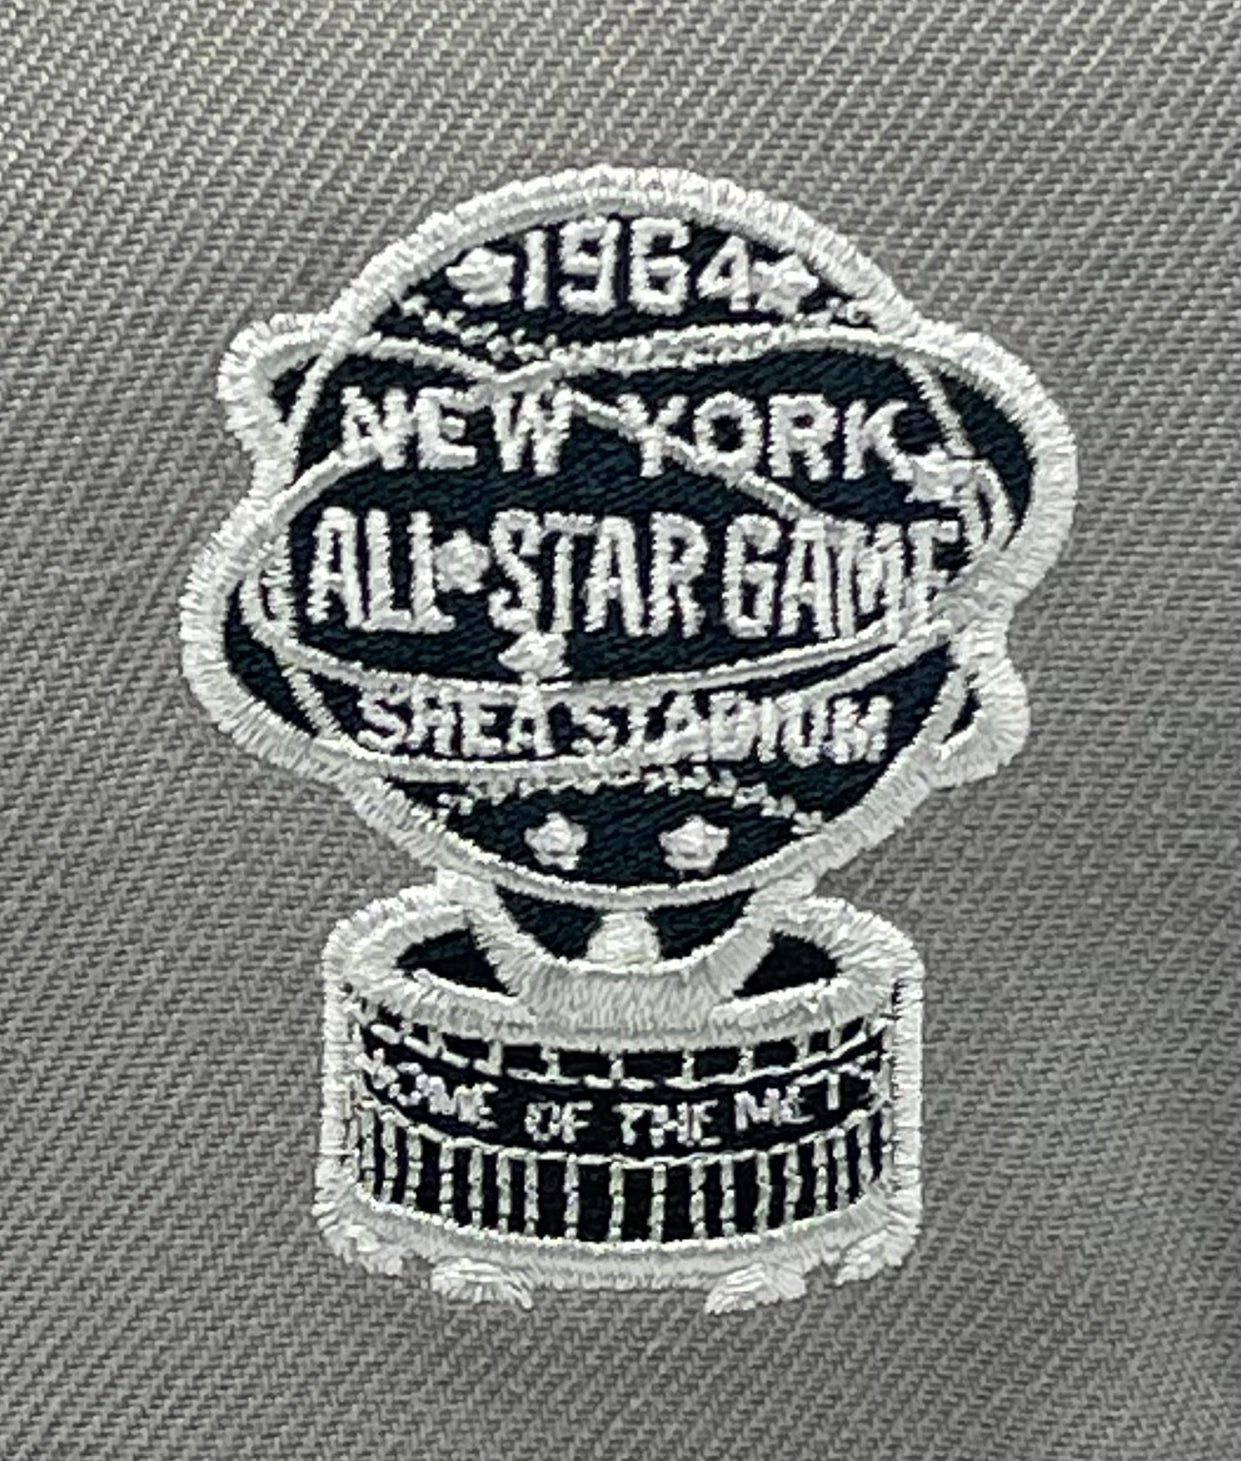 NEW YORK METS (GREY) (1964 ALLSTARGAME) NEW ERA 59FIFTY FITTED